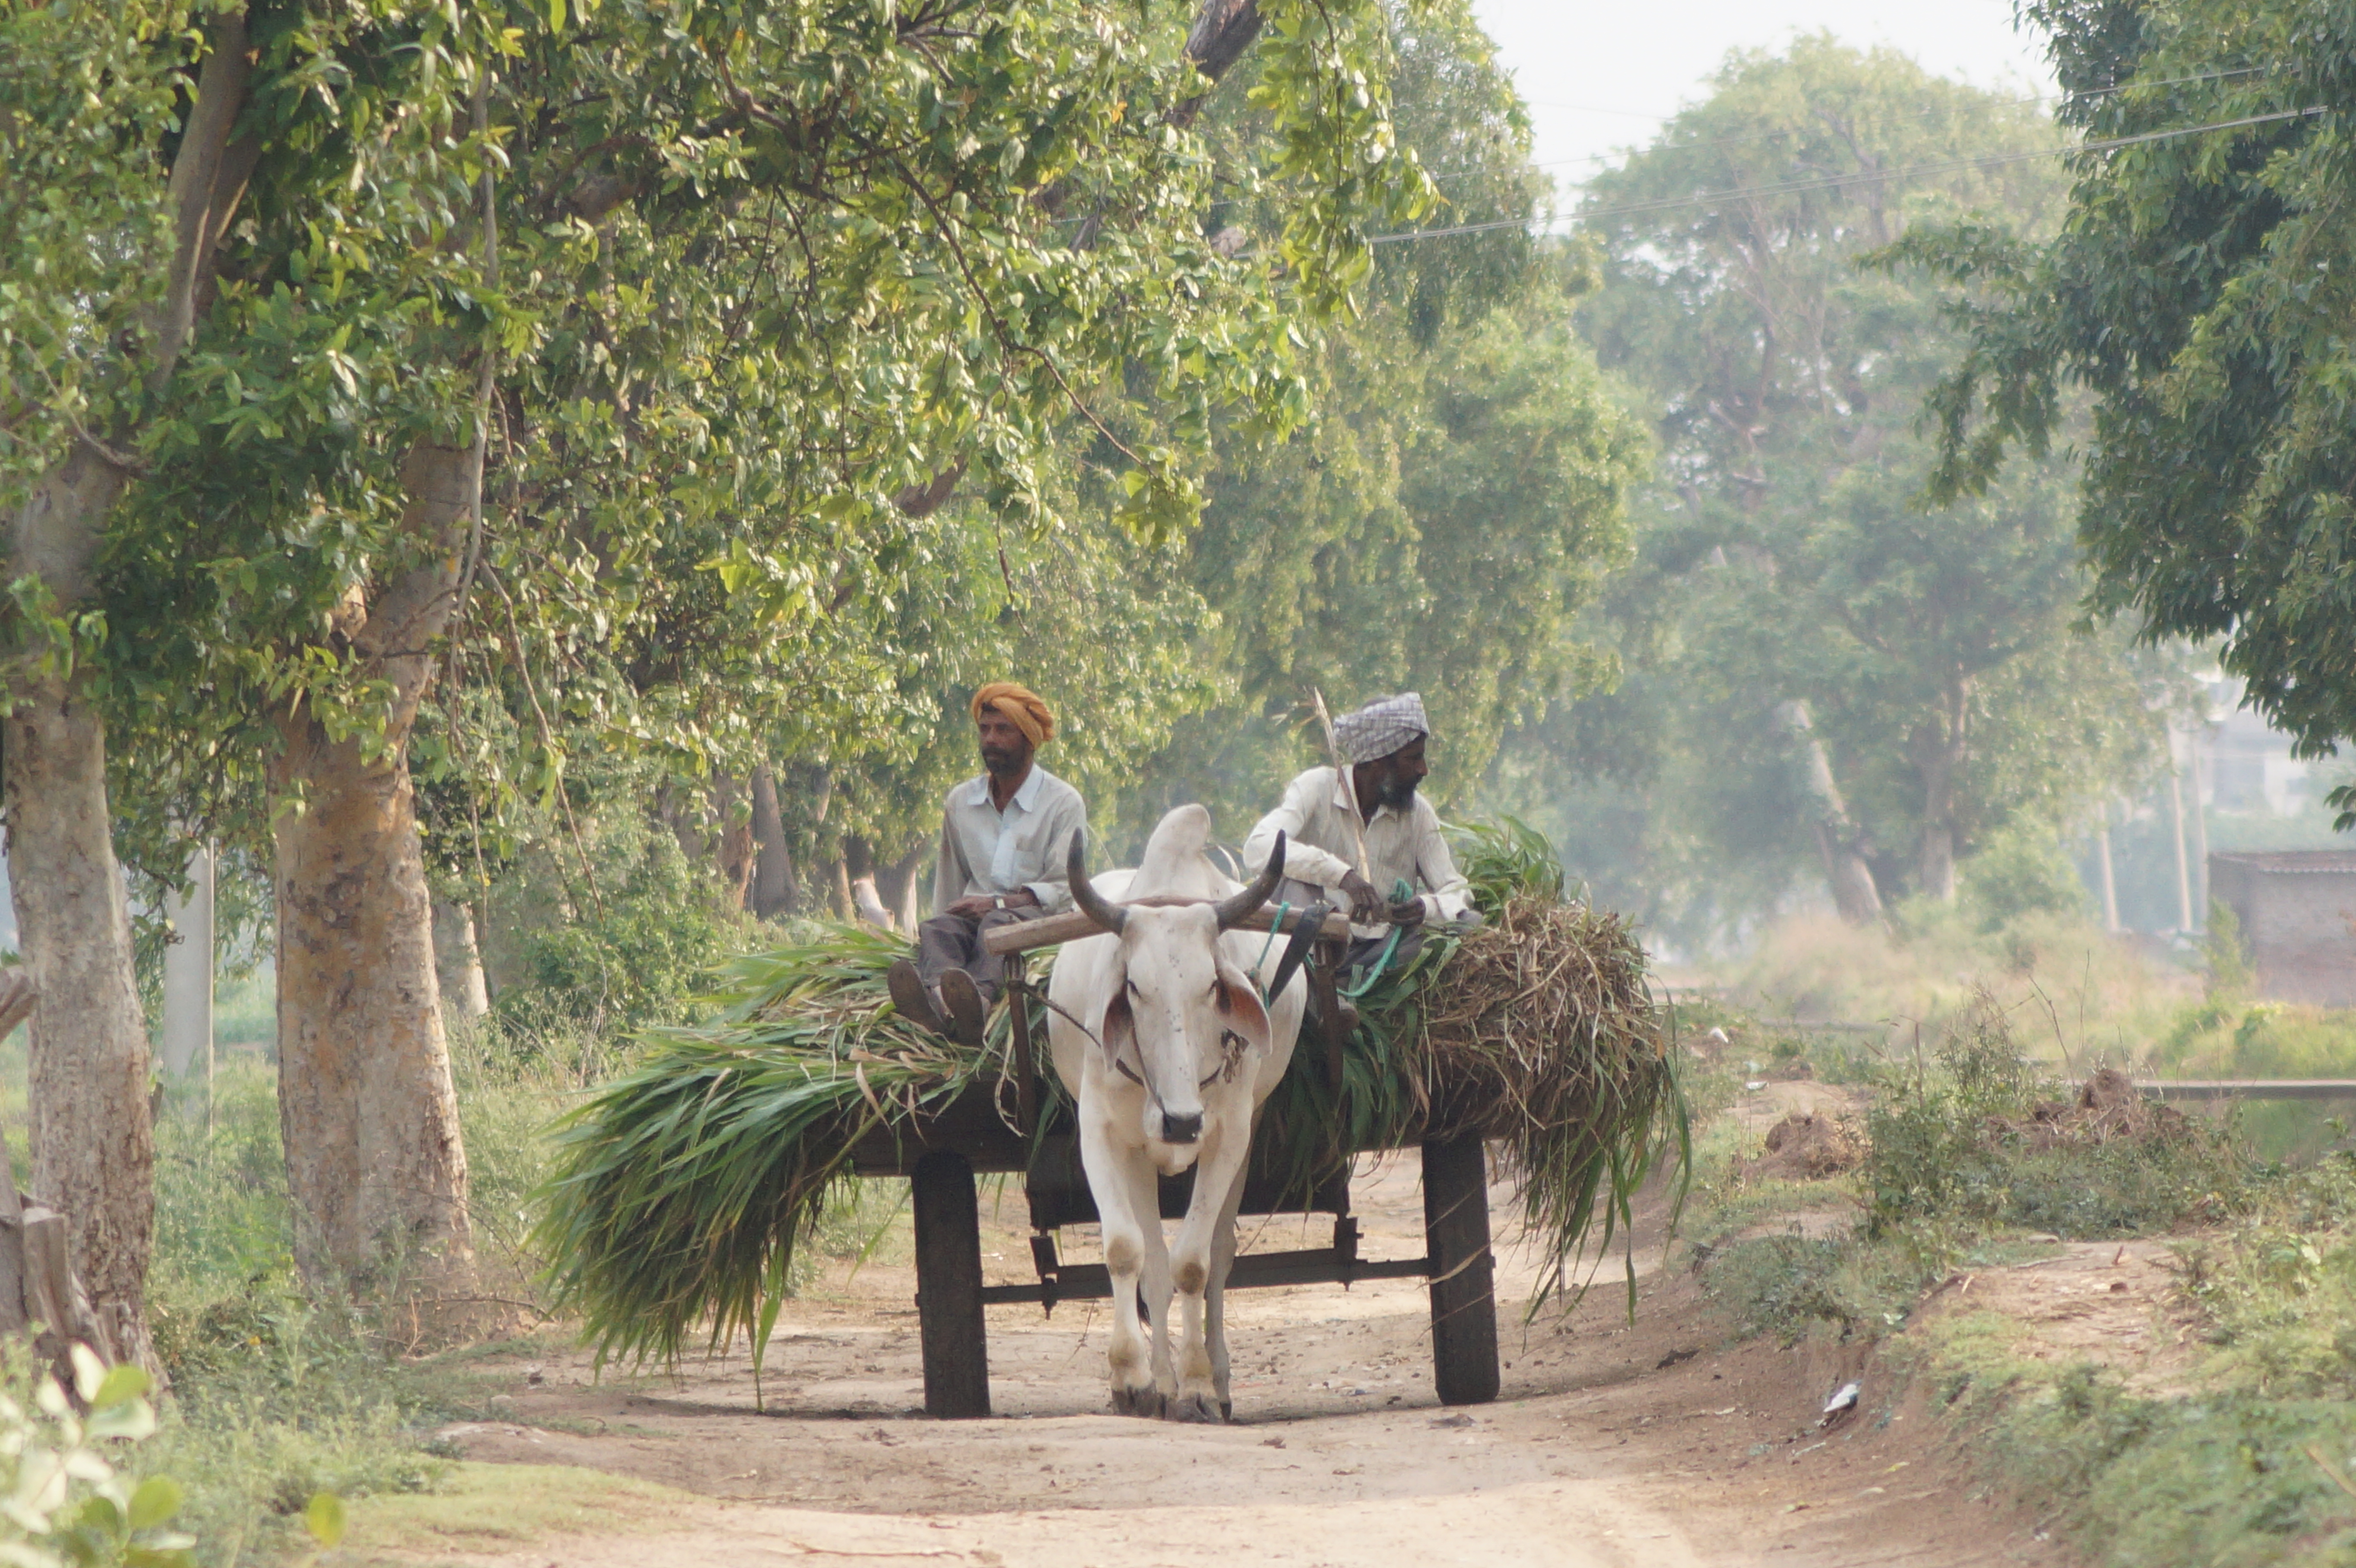 A modern-day oxcart in Punjab, India. Two men sit on an ox-pulled cart that travels down a tree-lined dirt road.